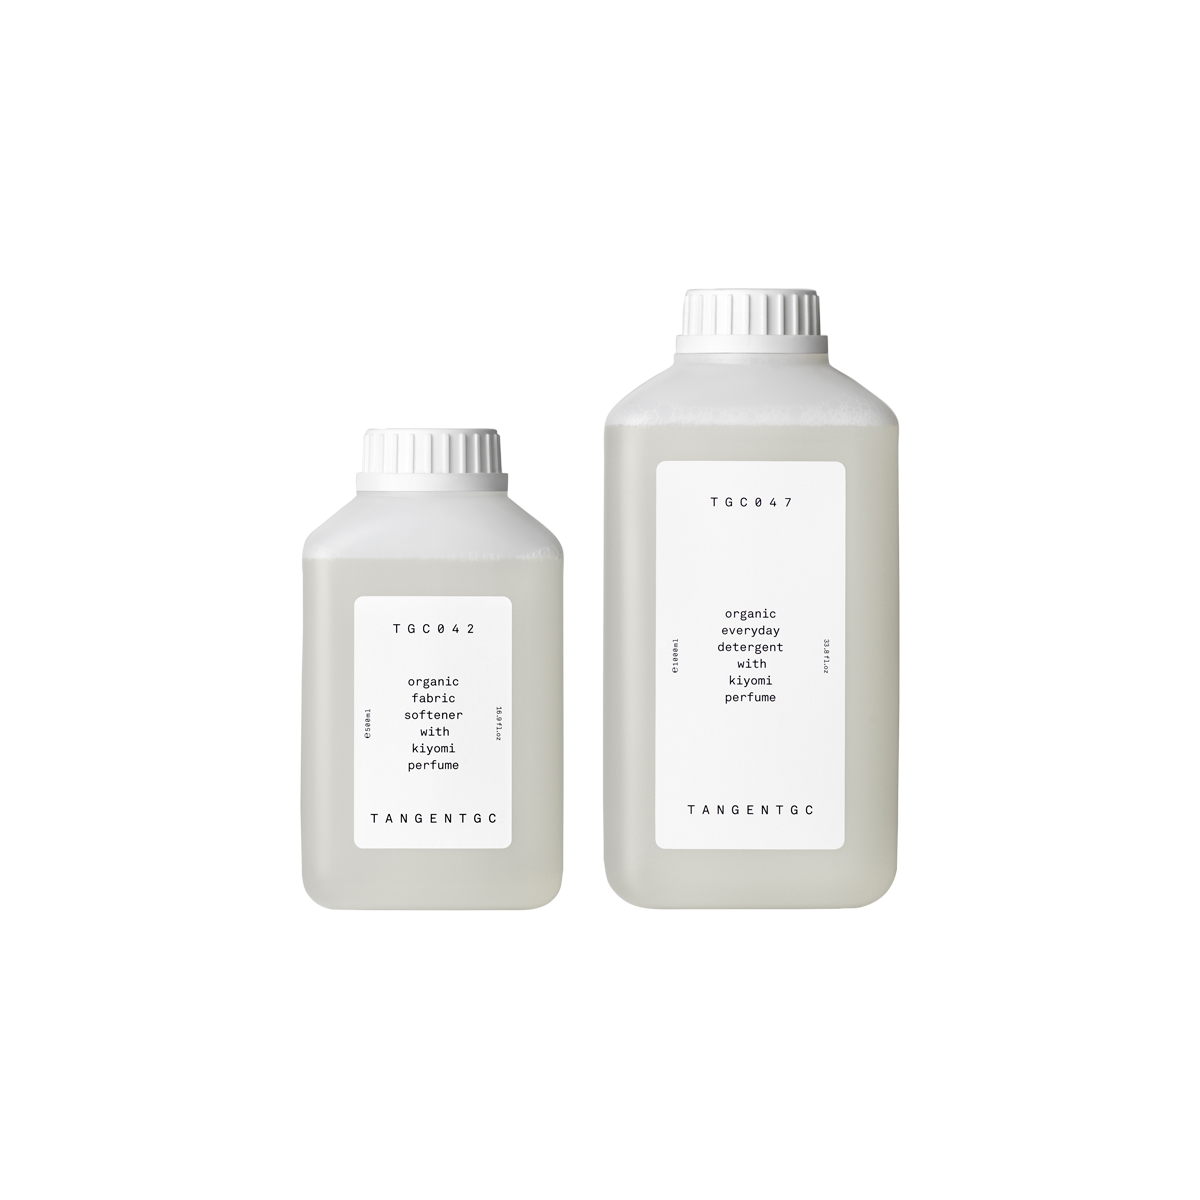 Tangent GC - Hypoallergenic Detergent without Perfume